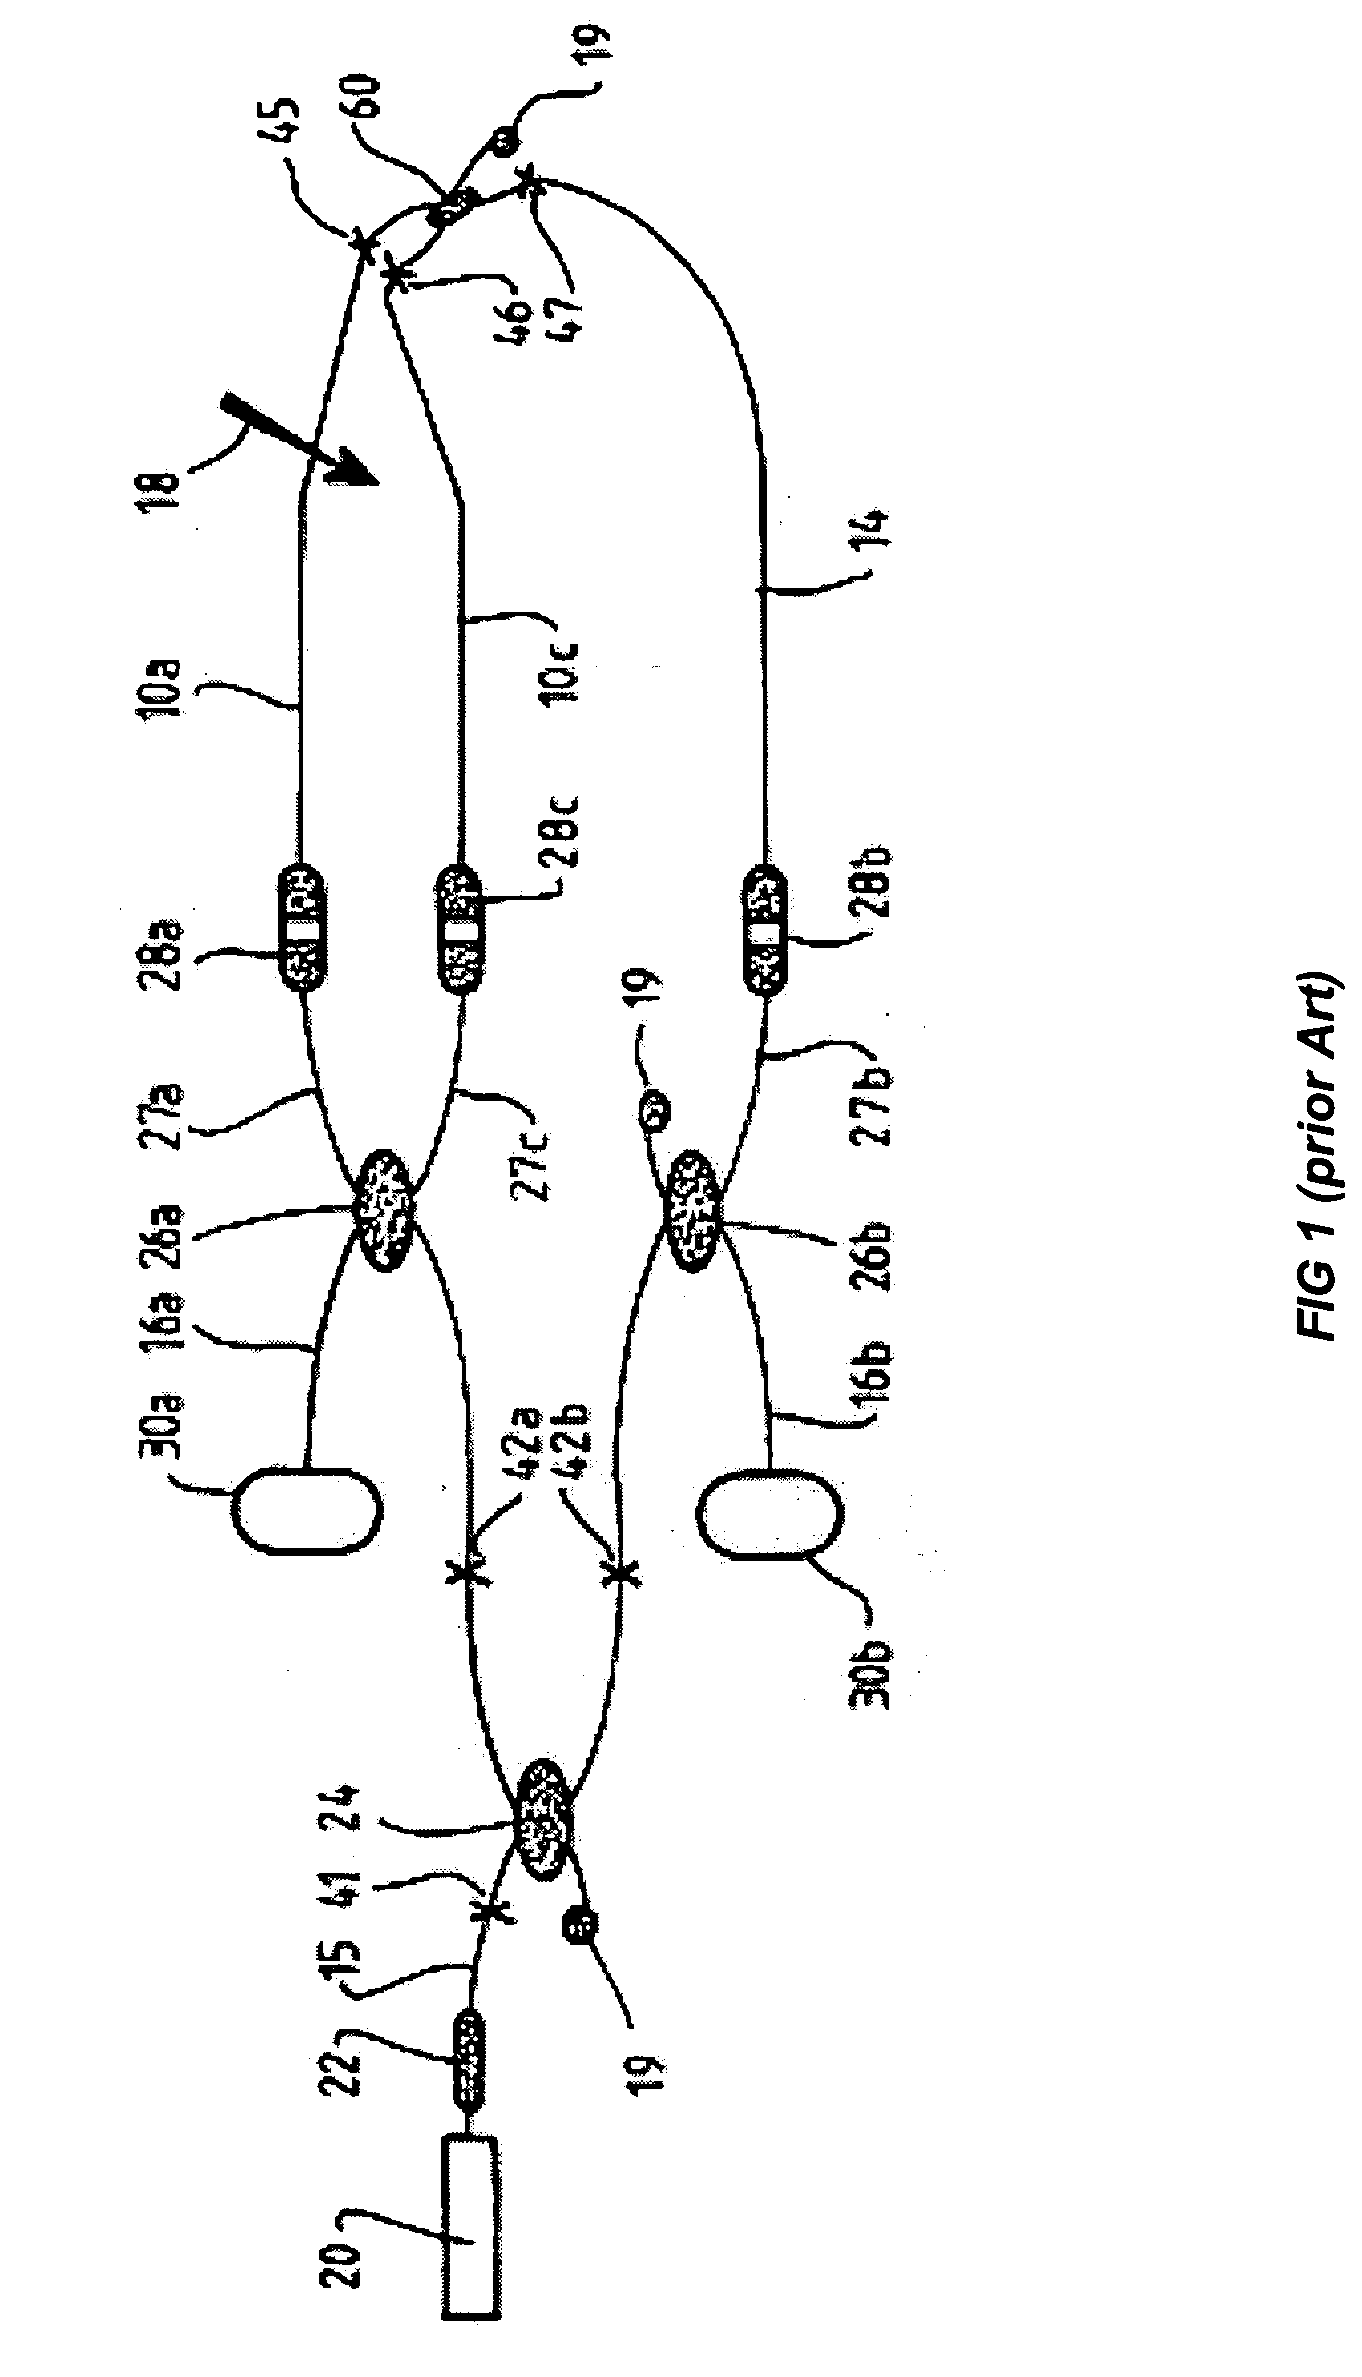 Distributed fiber sensor with interference detection and polarization state management